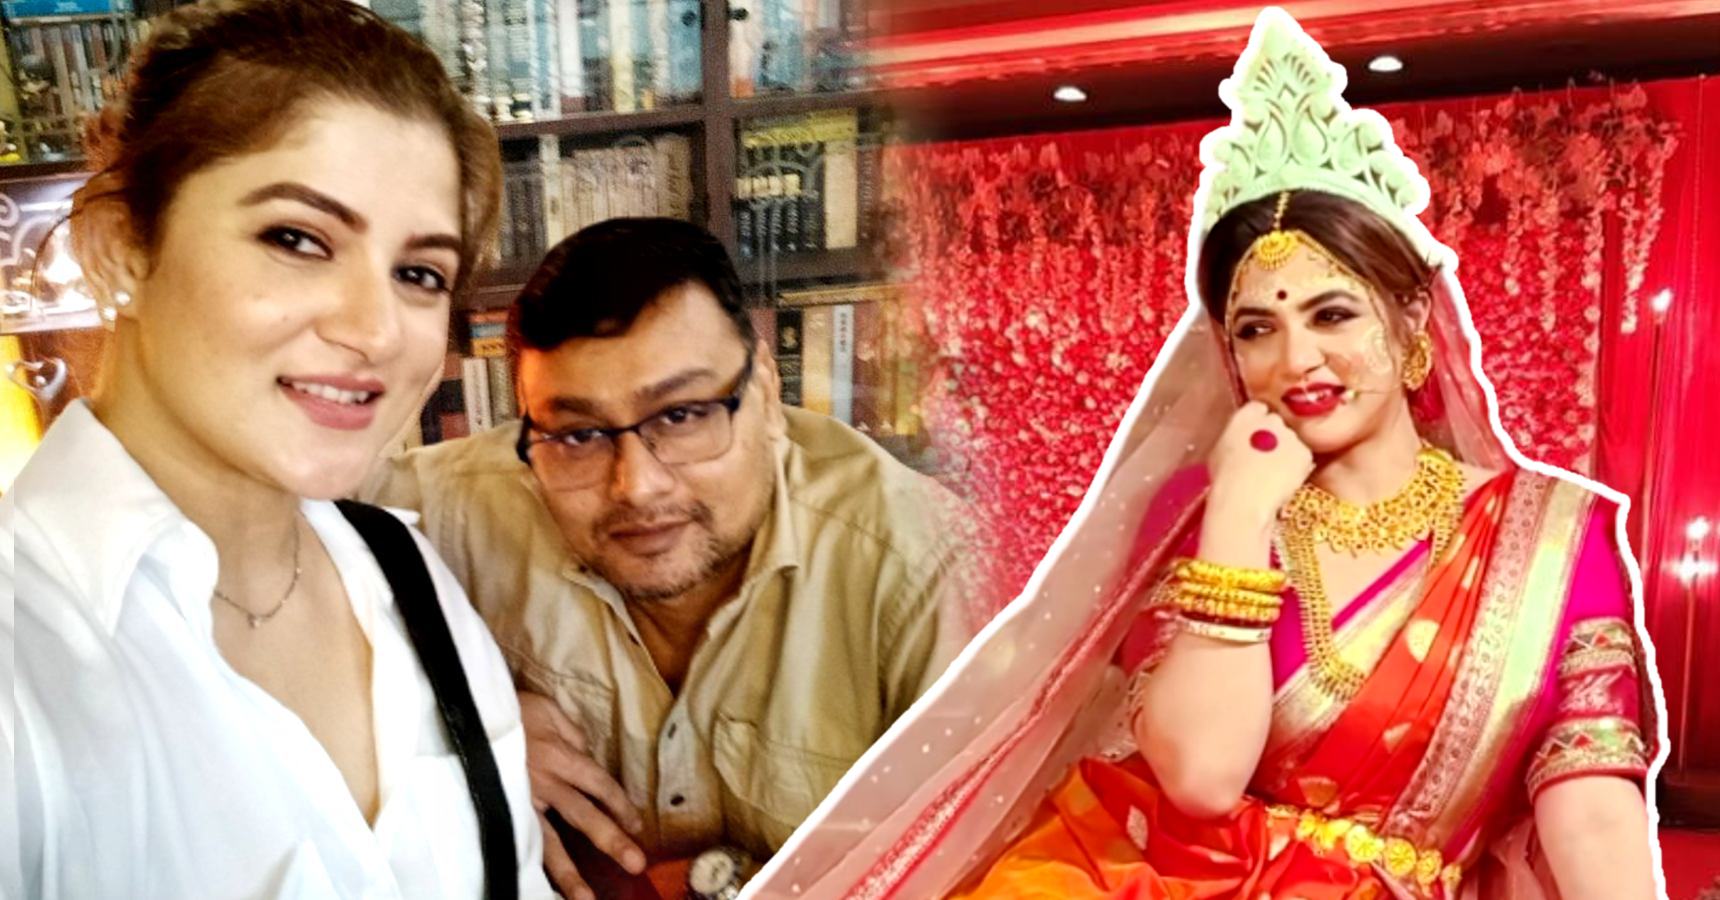 Director Subhrajit Mitra to play Srabanti Chatterjee's Husband role amid Dating Rumours